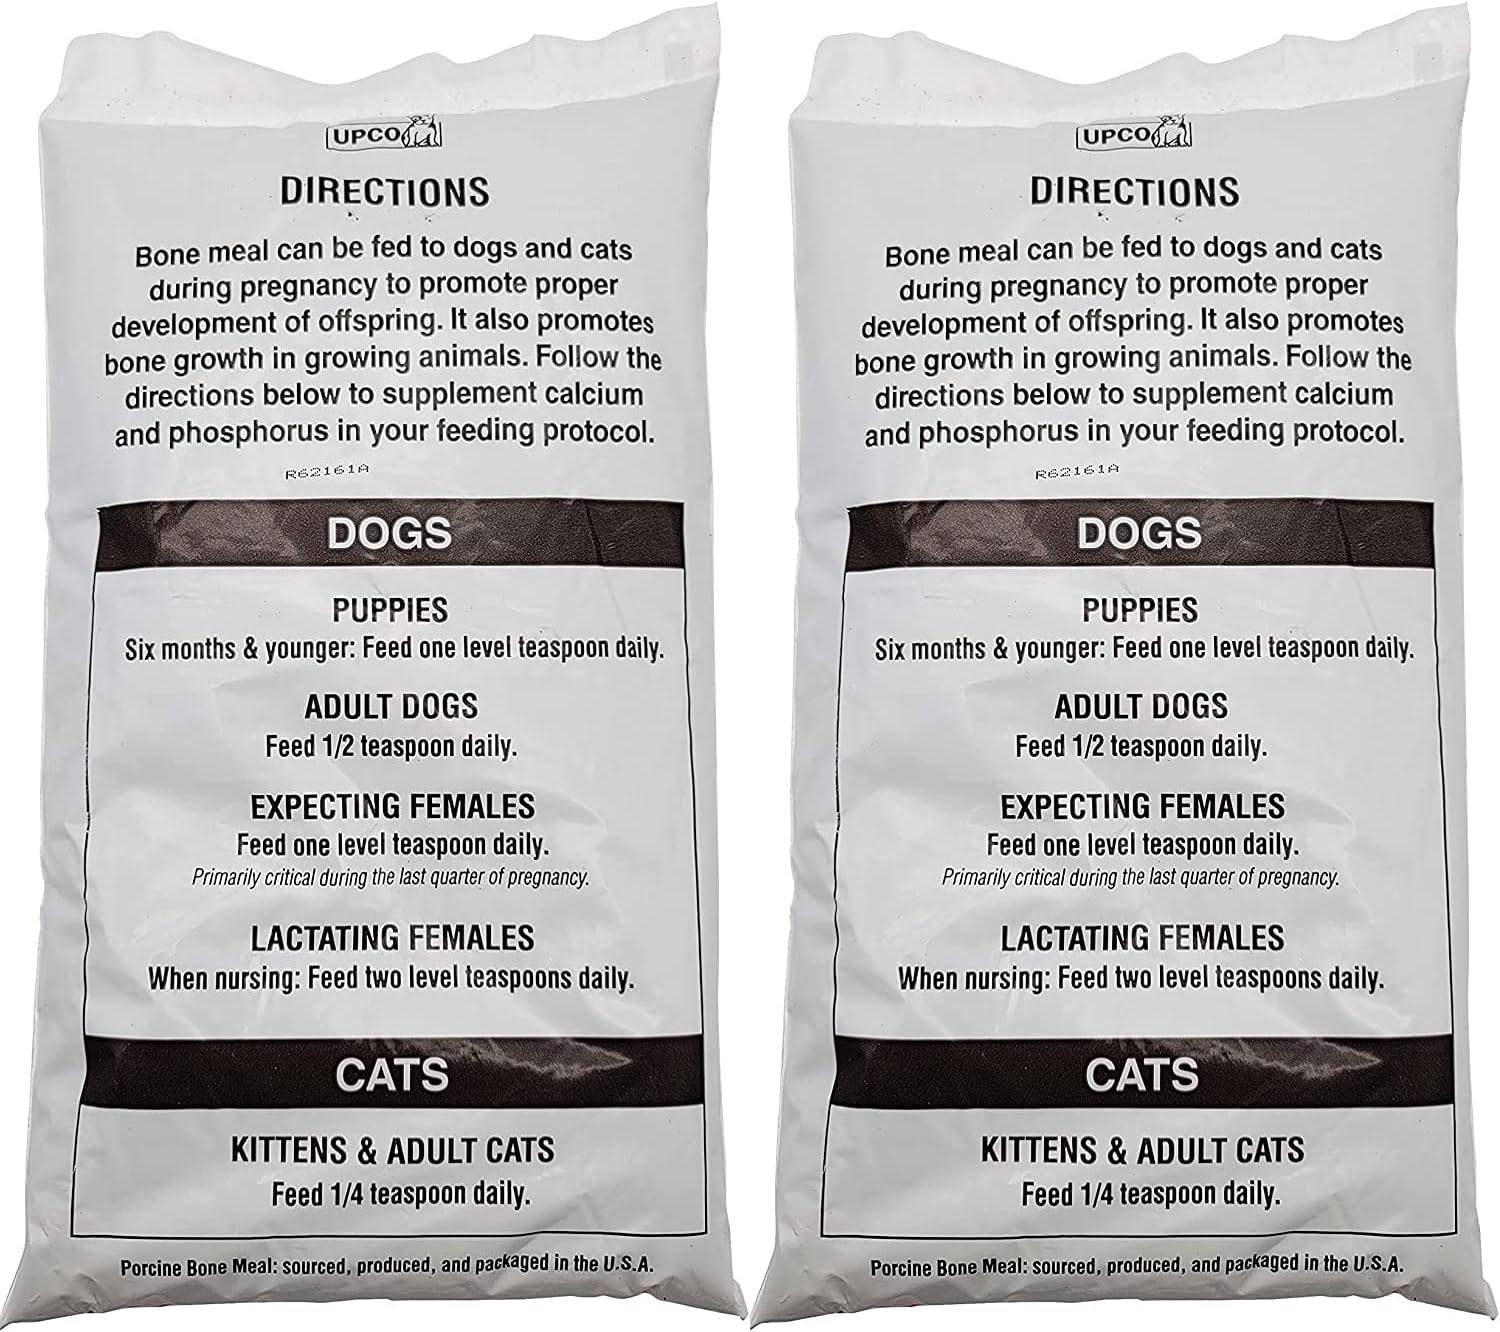 Bone Meal Steamed Powder for Dogs and Cats 2 Pack Total 2 Pounds from Upco Bone Meal Made in USA : Pet Supplies